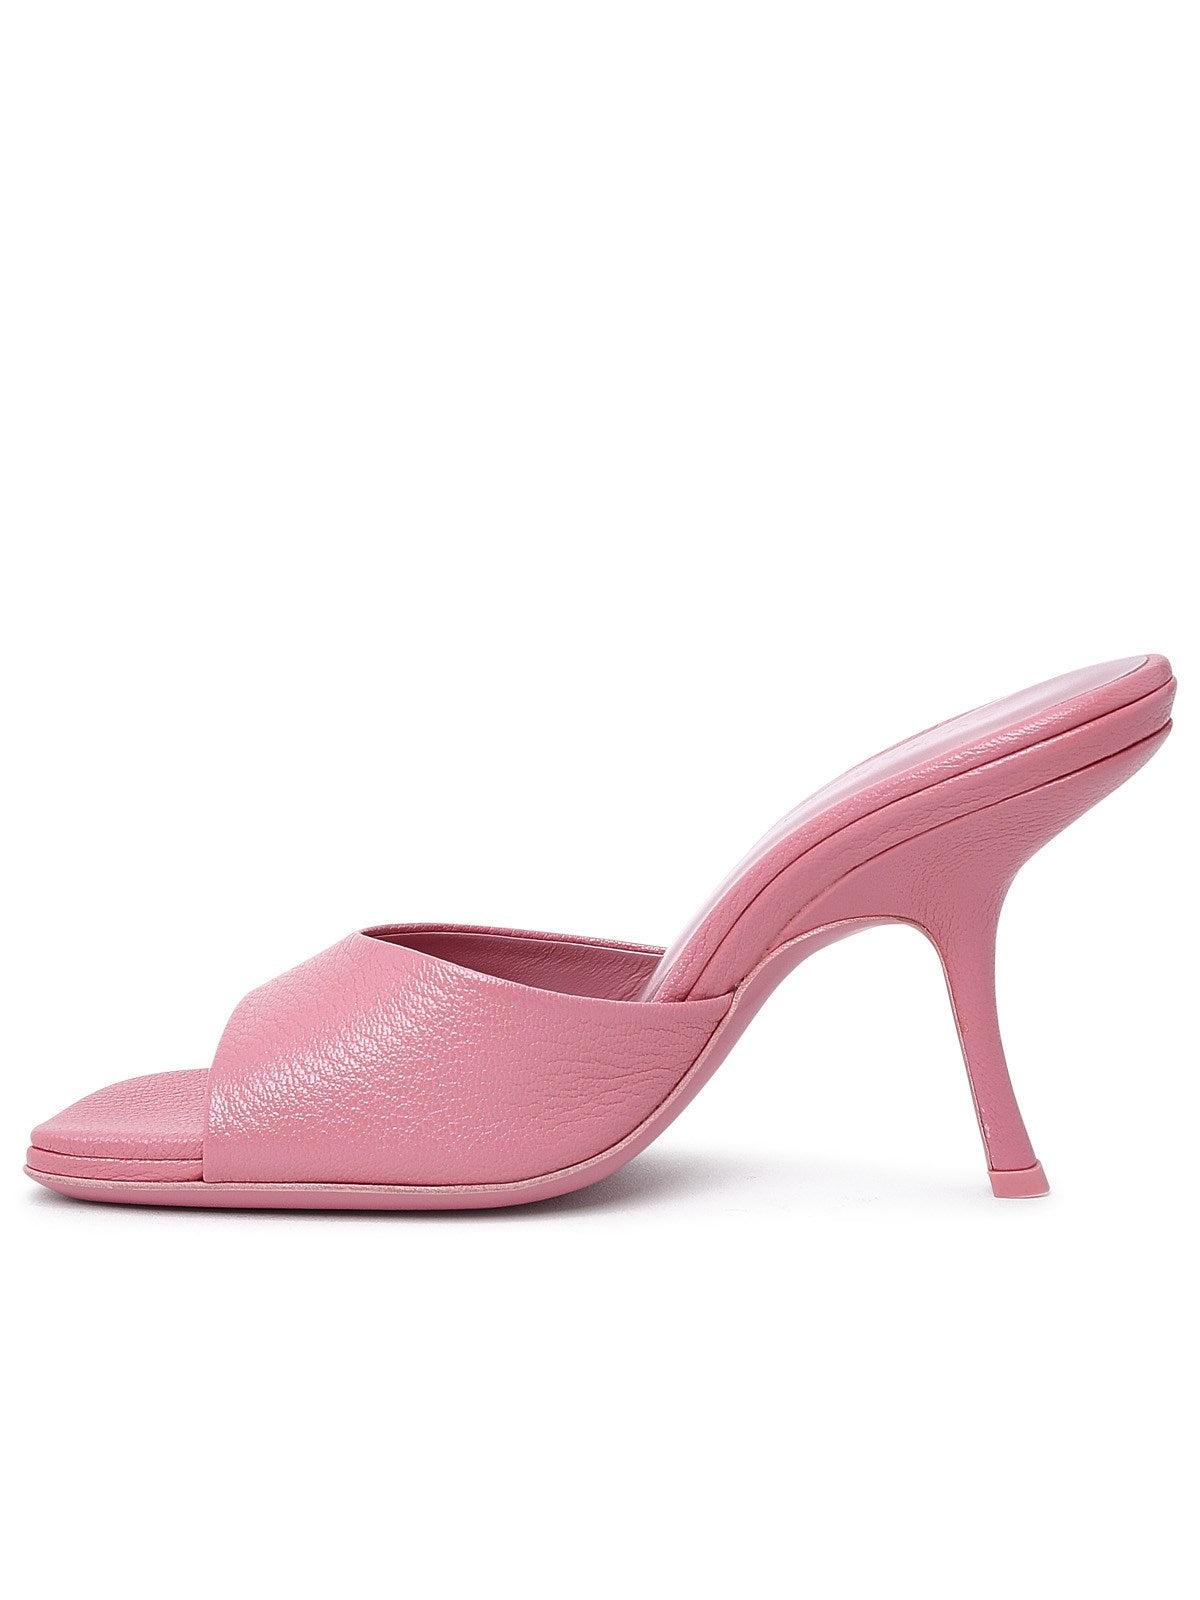 BY FAR Pink Leather Mora Sabots | Lyst